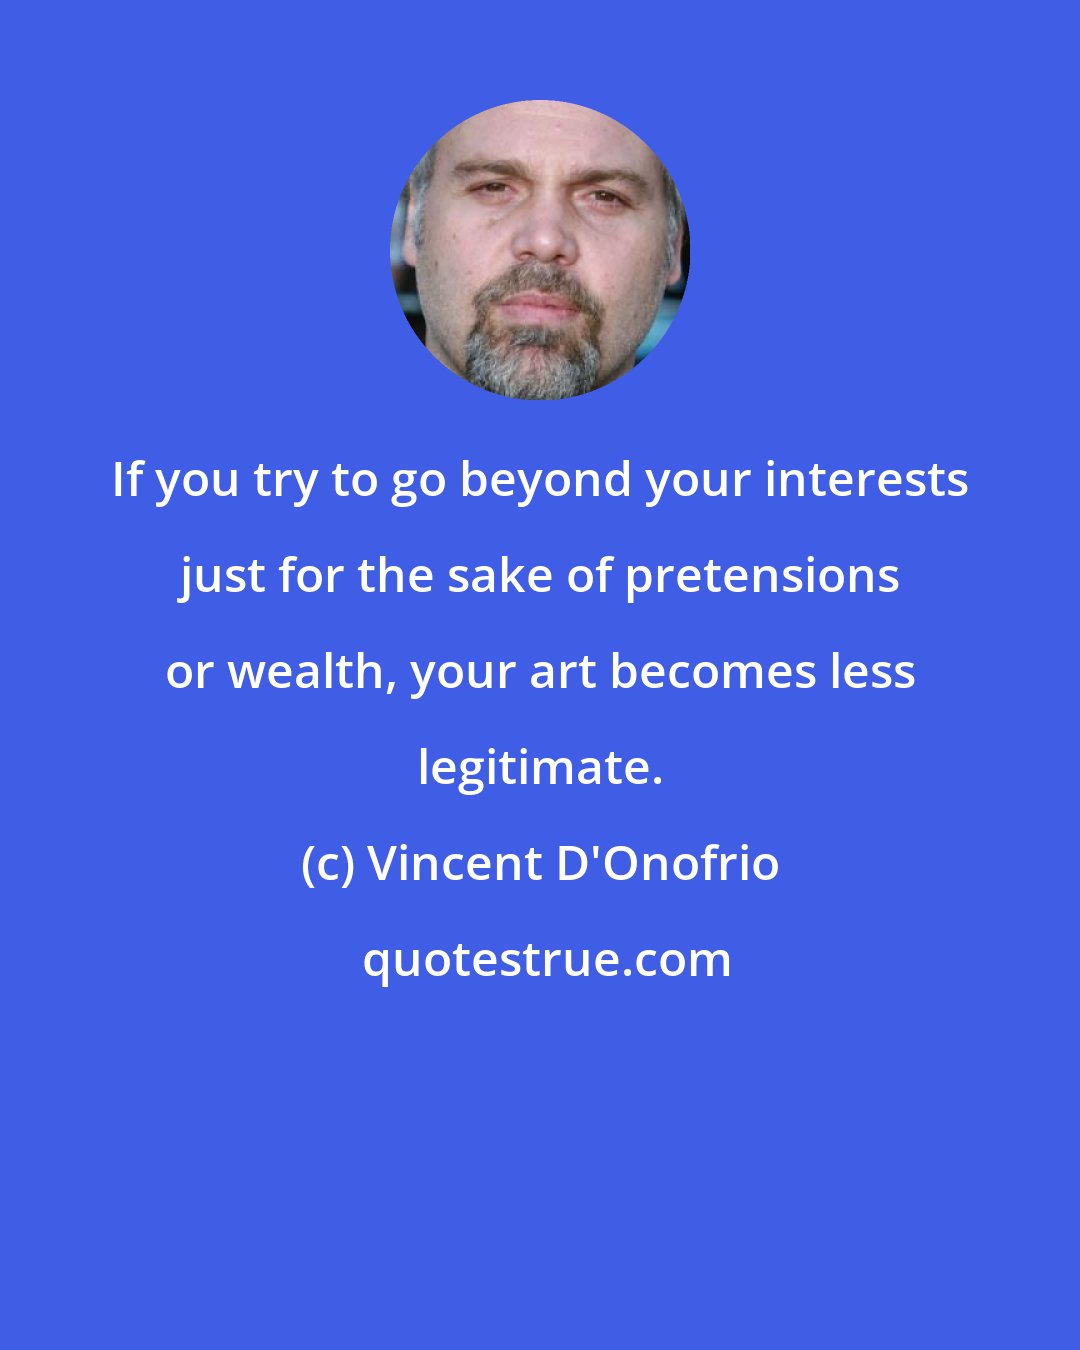 Vincent D'Onofrio: If you try to go beyond your interests just for the sake of pretensions or wealth, your art becomes less legitimate.